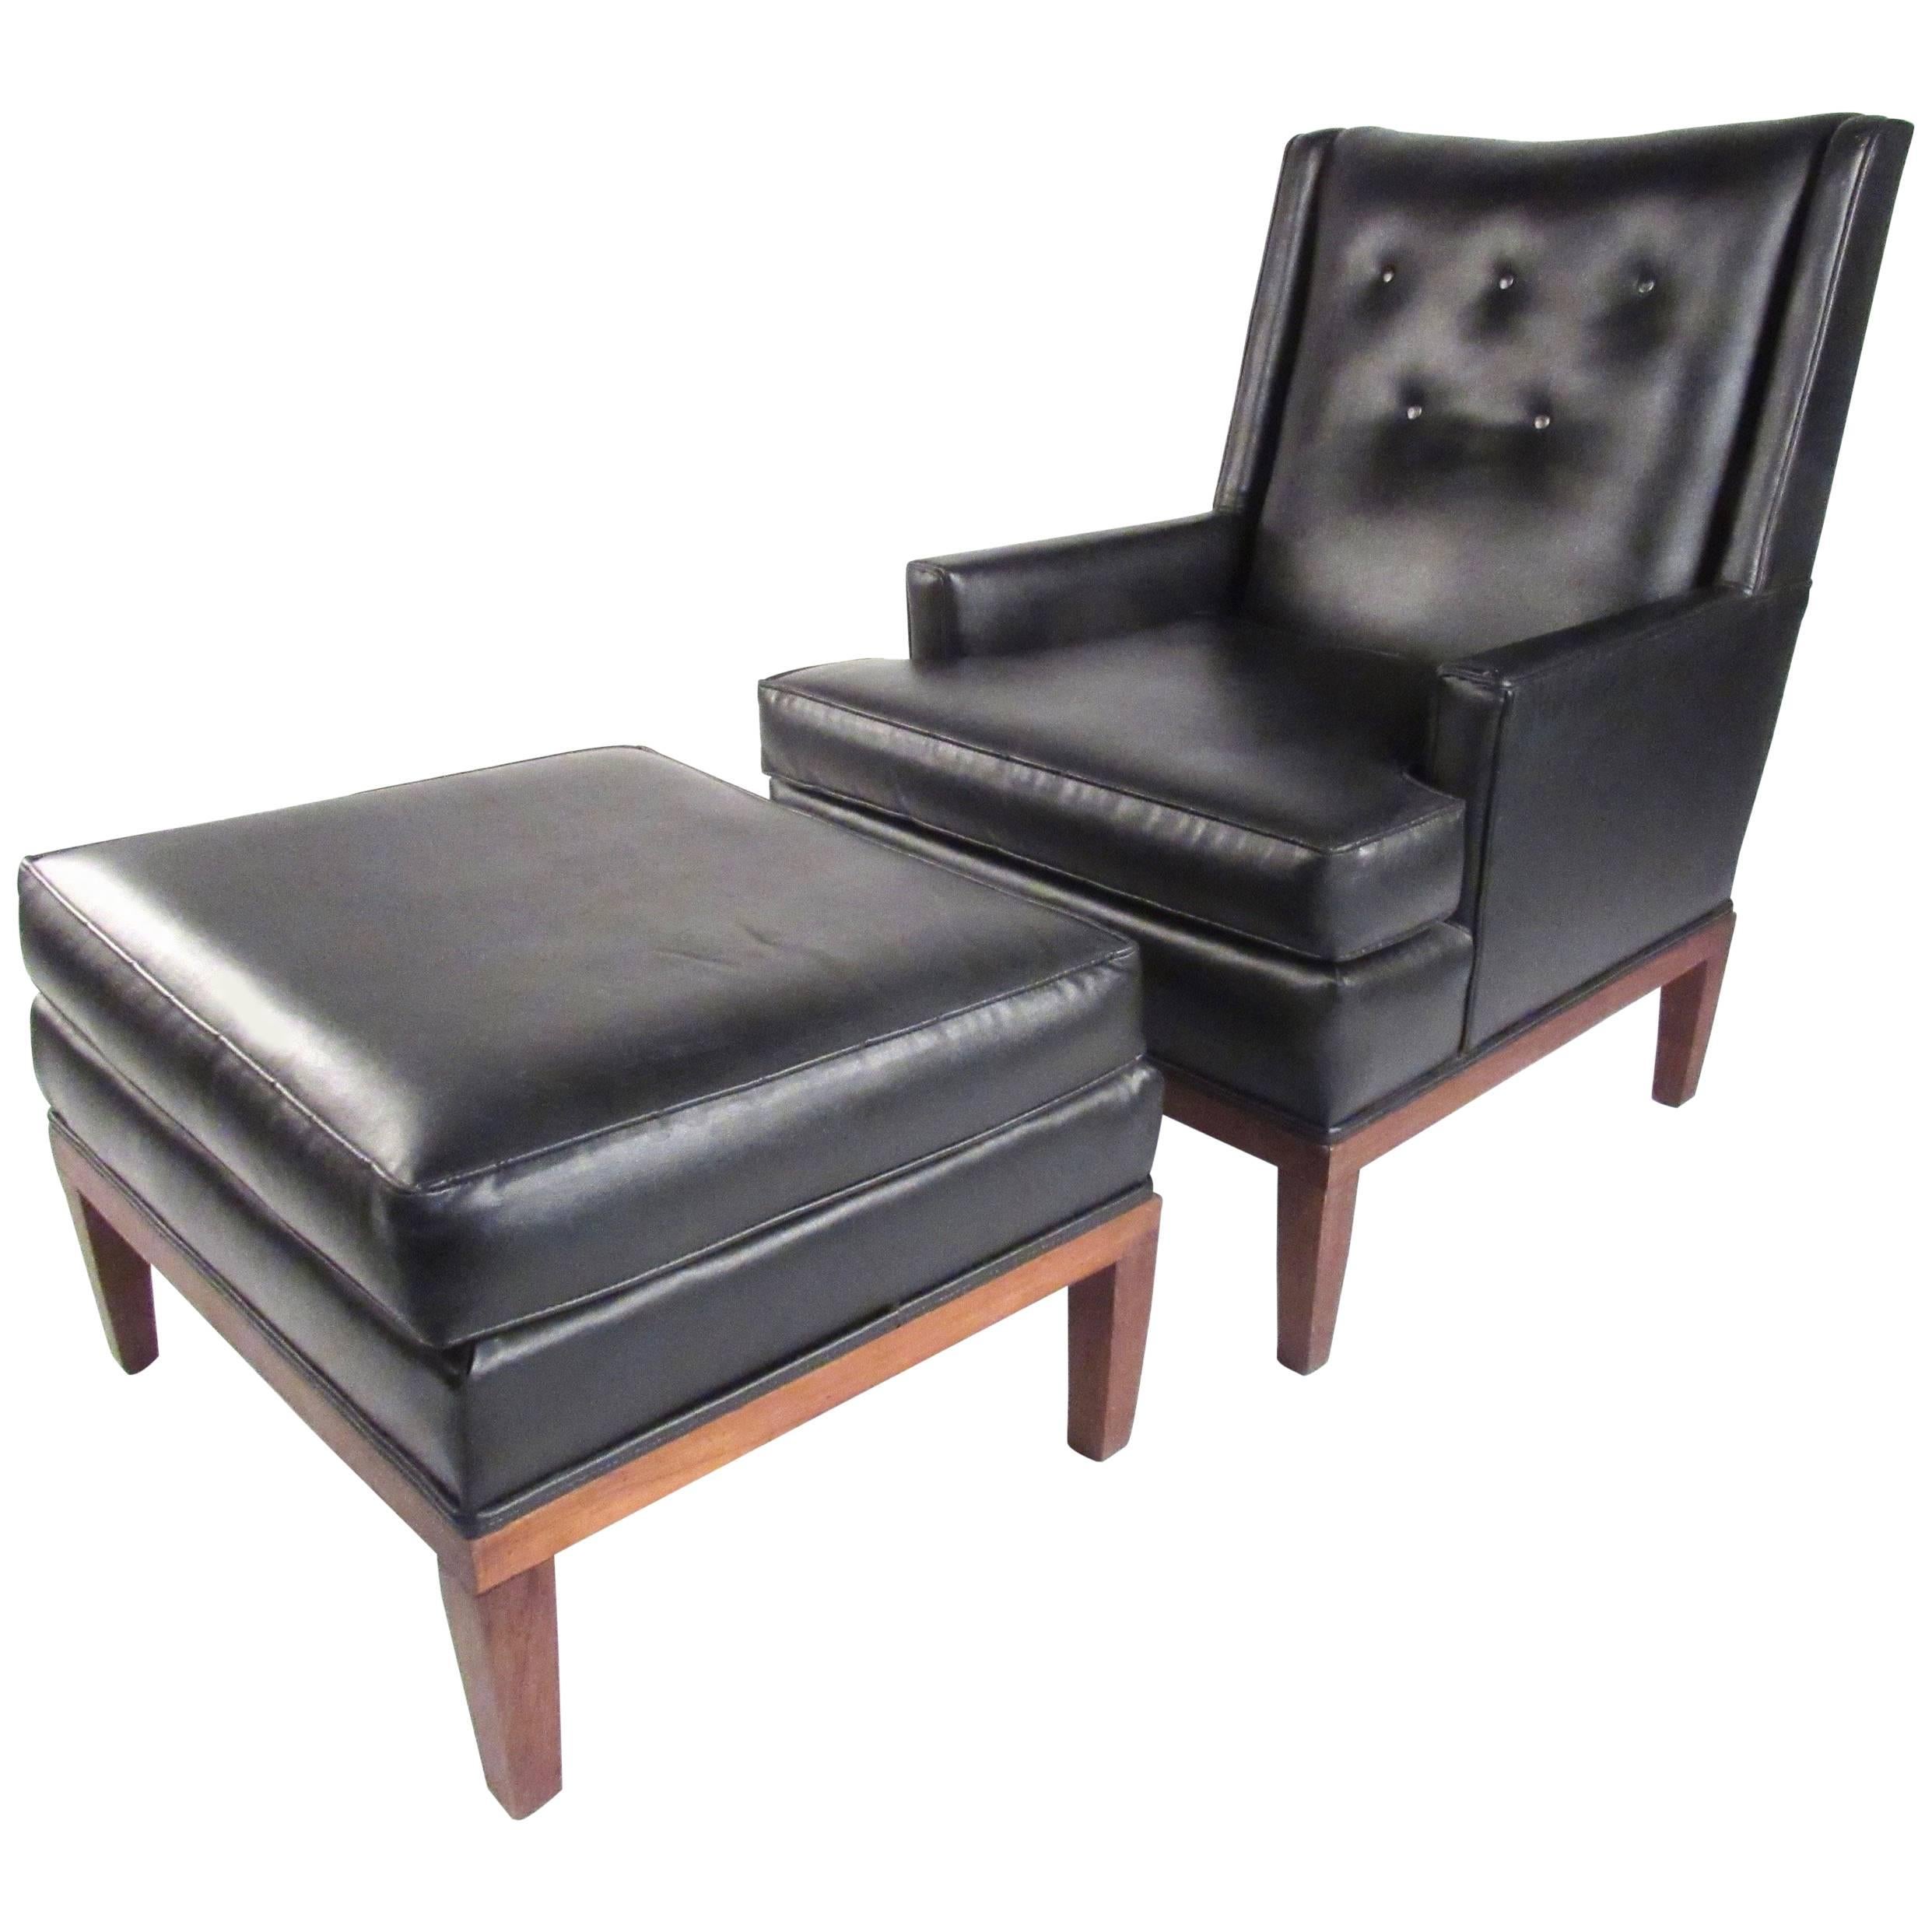 Mid-Century Modern Lounge Chair with Ottoman